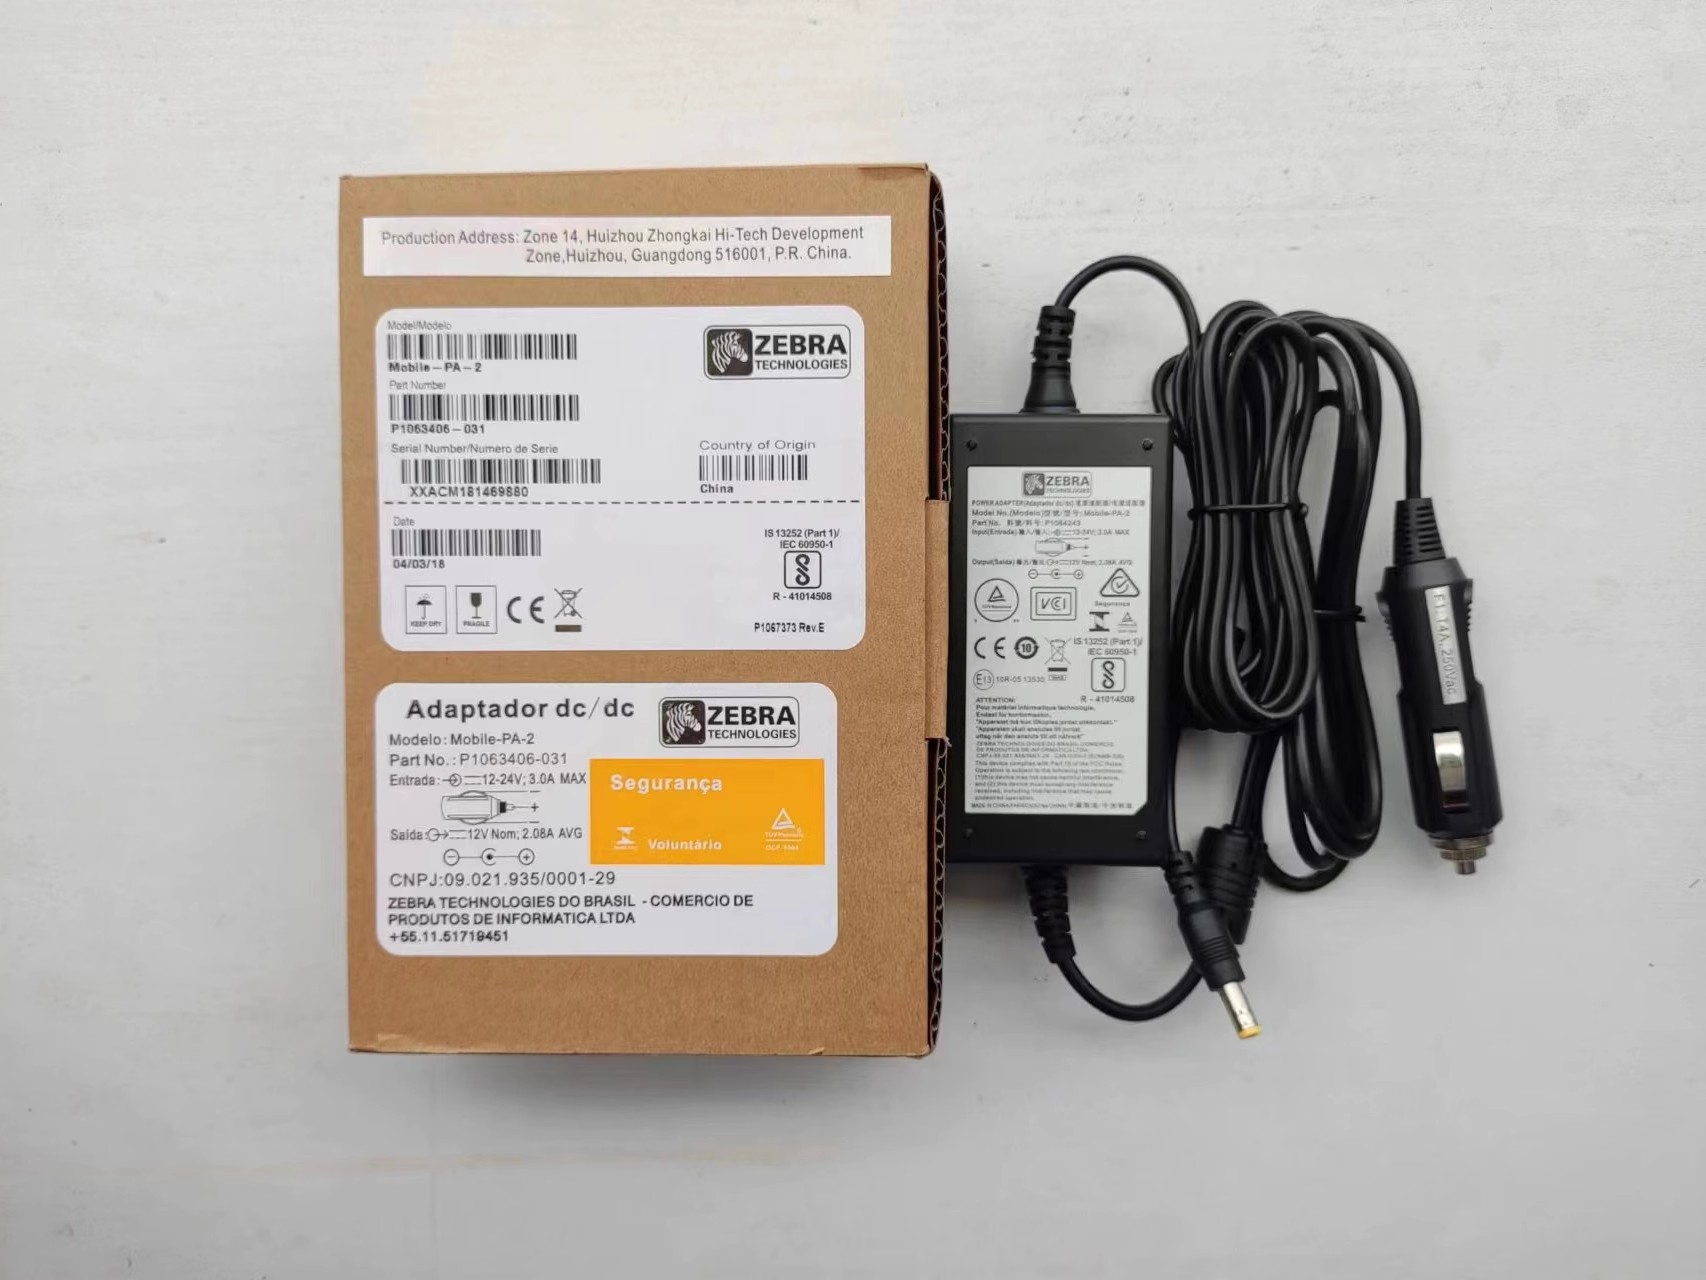 *Brand NEW*12-24V 3.0A MAX 12V 2.08A AC/DC AC ADAPTER ZEBRA P1064243 M0biIe-PA-2 POWER Supply